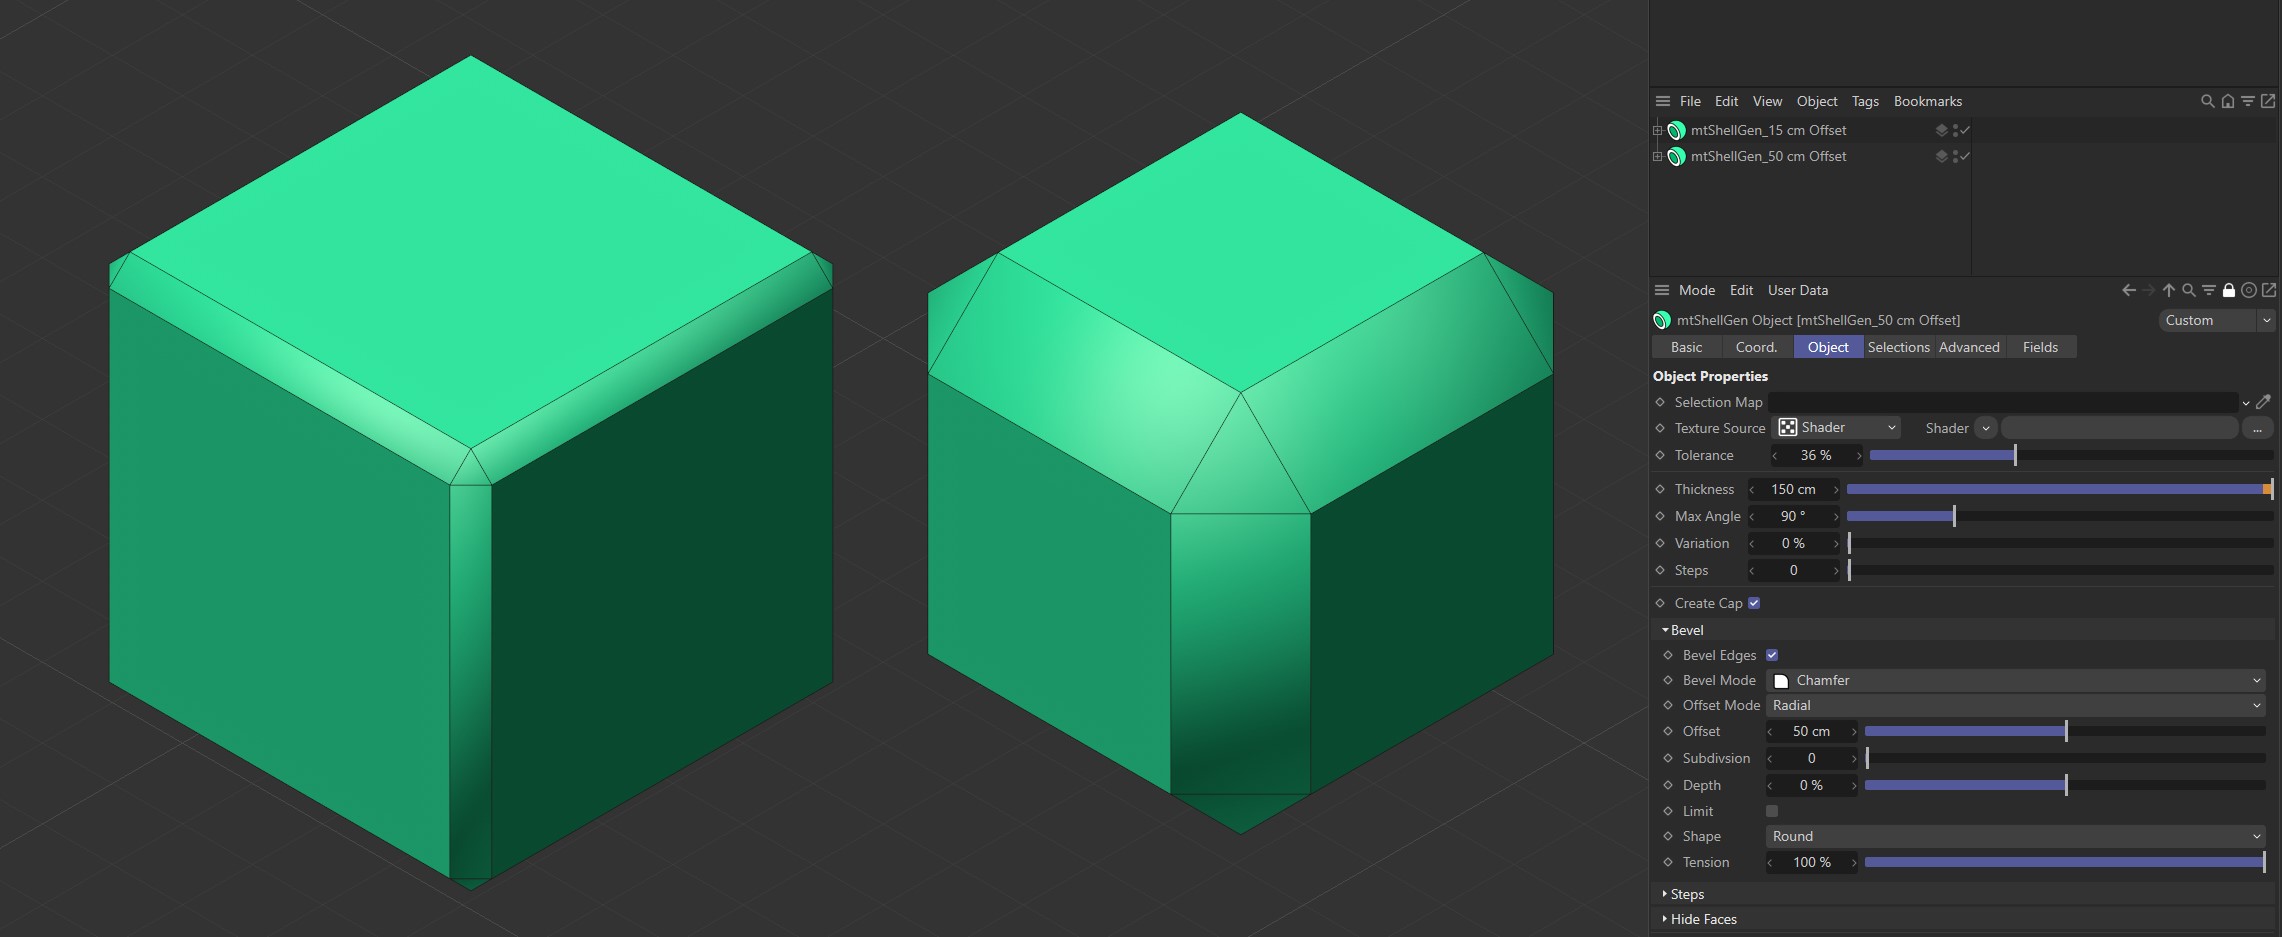 The left-hand Cube has an offset of 15 cm. The offset is 50 cm for the Cube on the right.